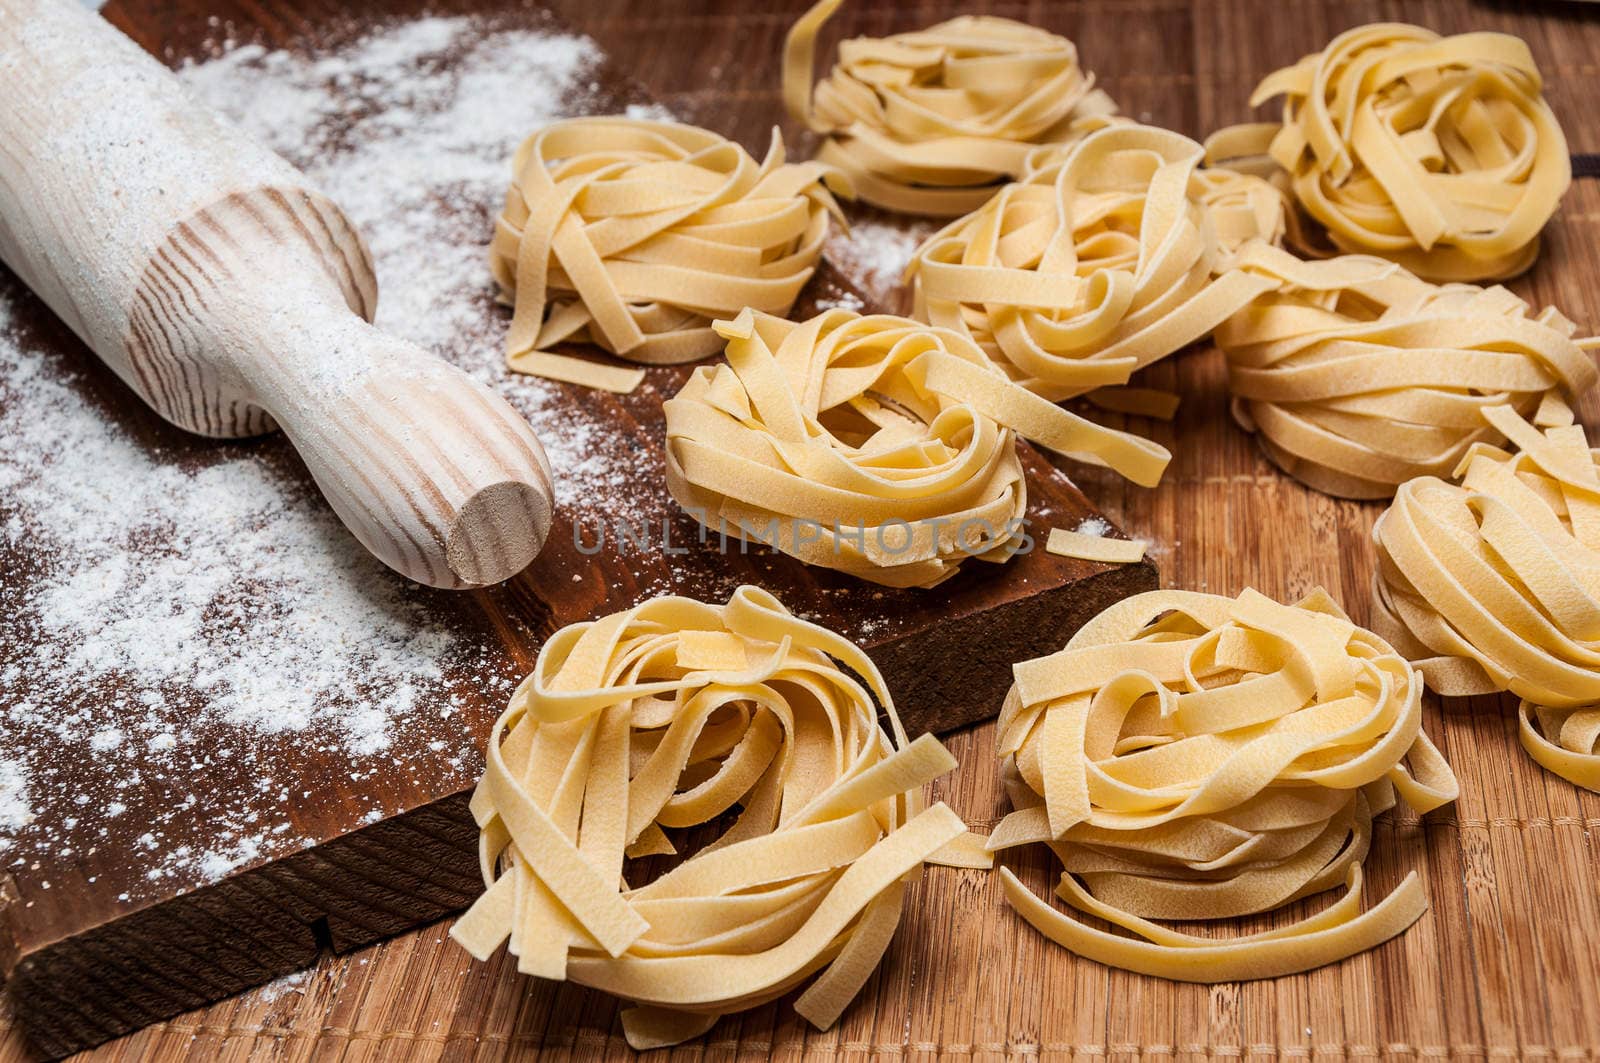 Homemade tagliatelle, flour and rolling pin